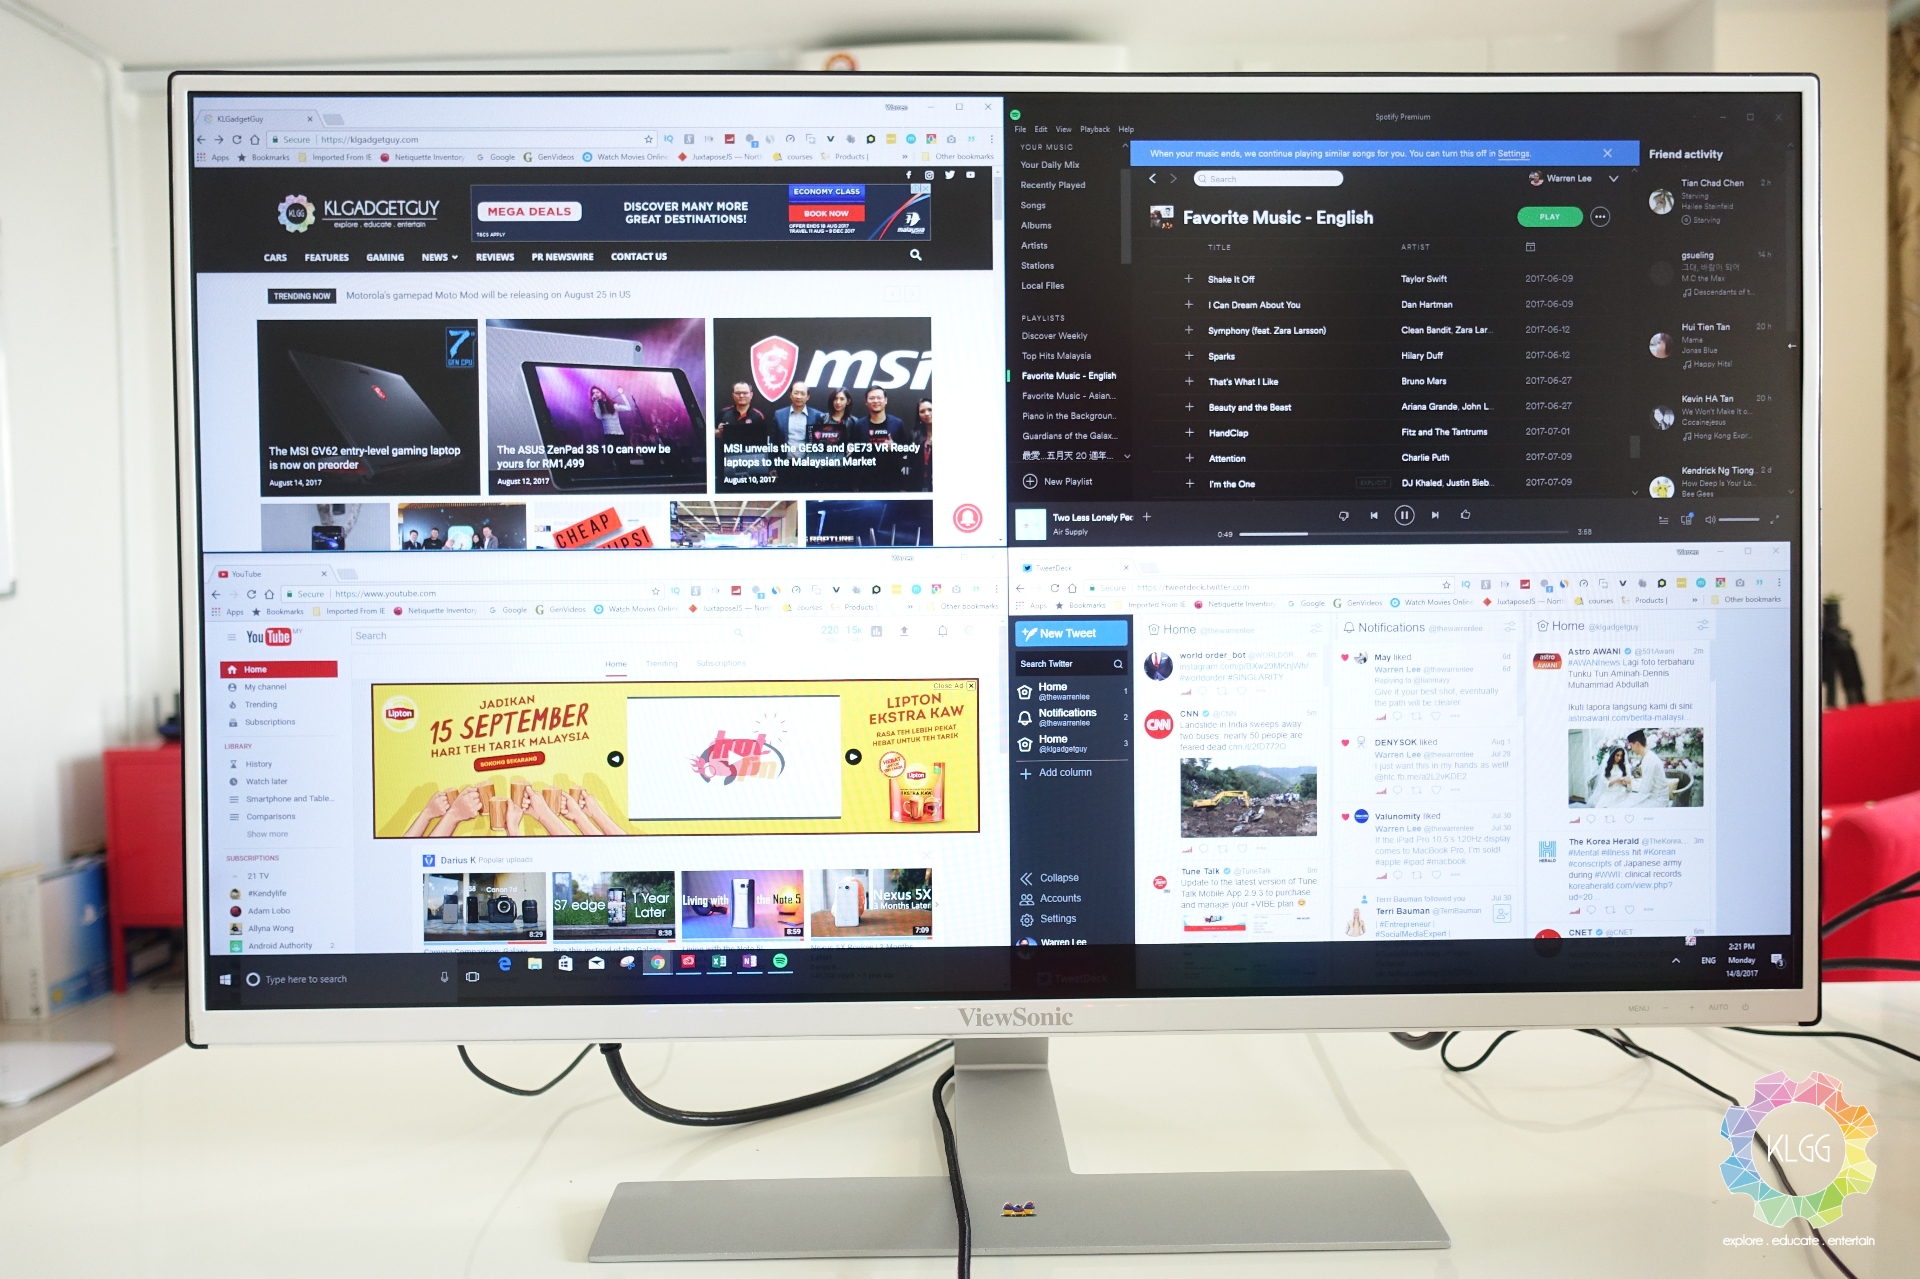 ViewSonic VX3209-2K Review: 32-inch 2K IPS monitor made affordable ...